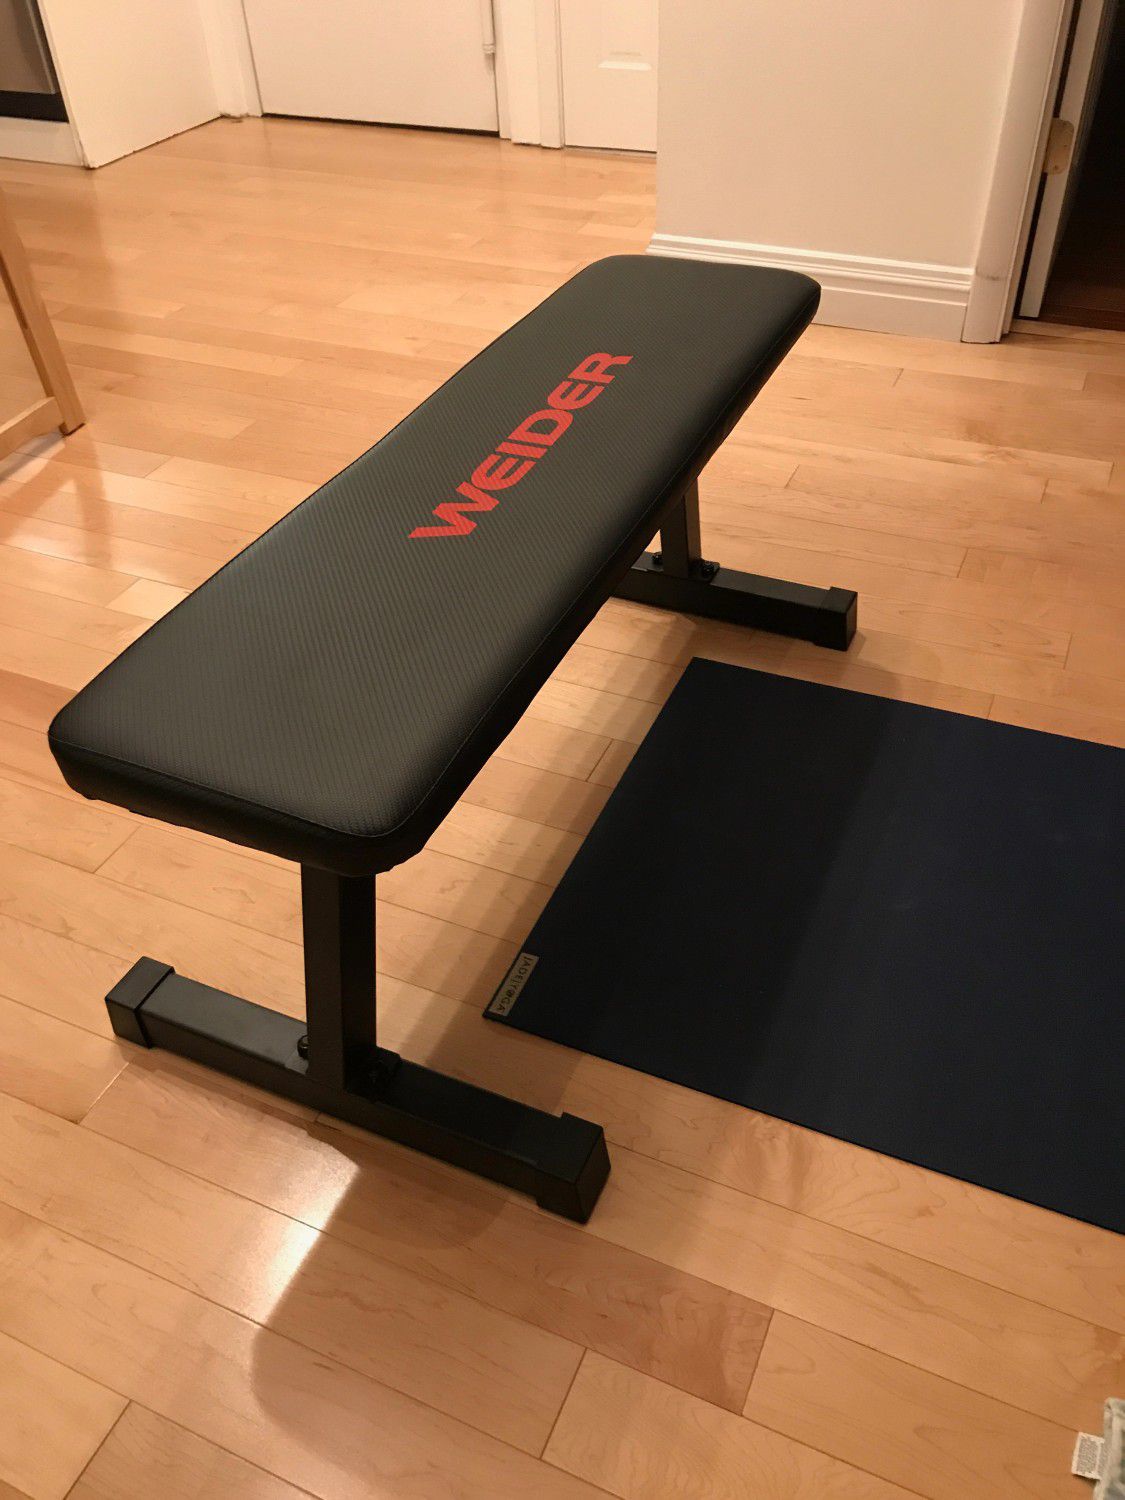 Flat Bench Workout weight. GYM Exercise. Fitness Gear. 460 lbs weight capacity. Sealed in the box